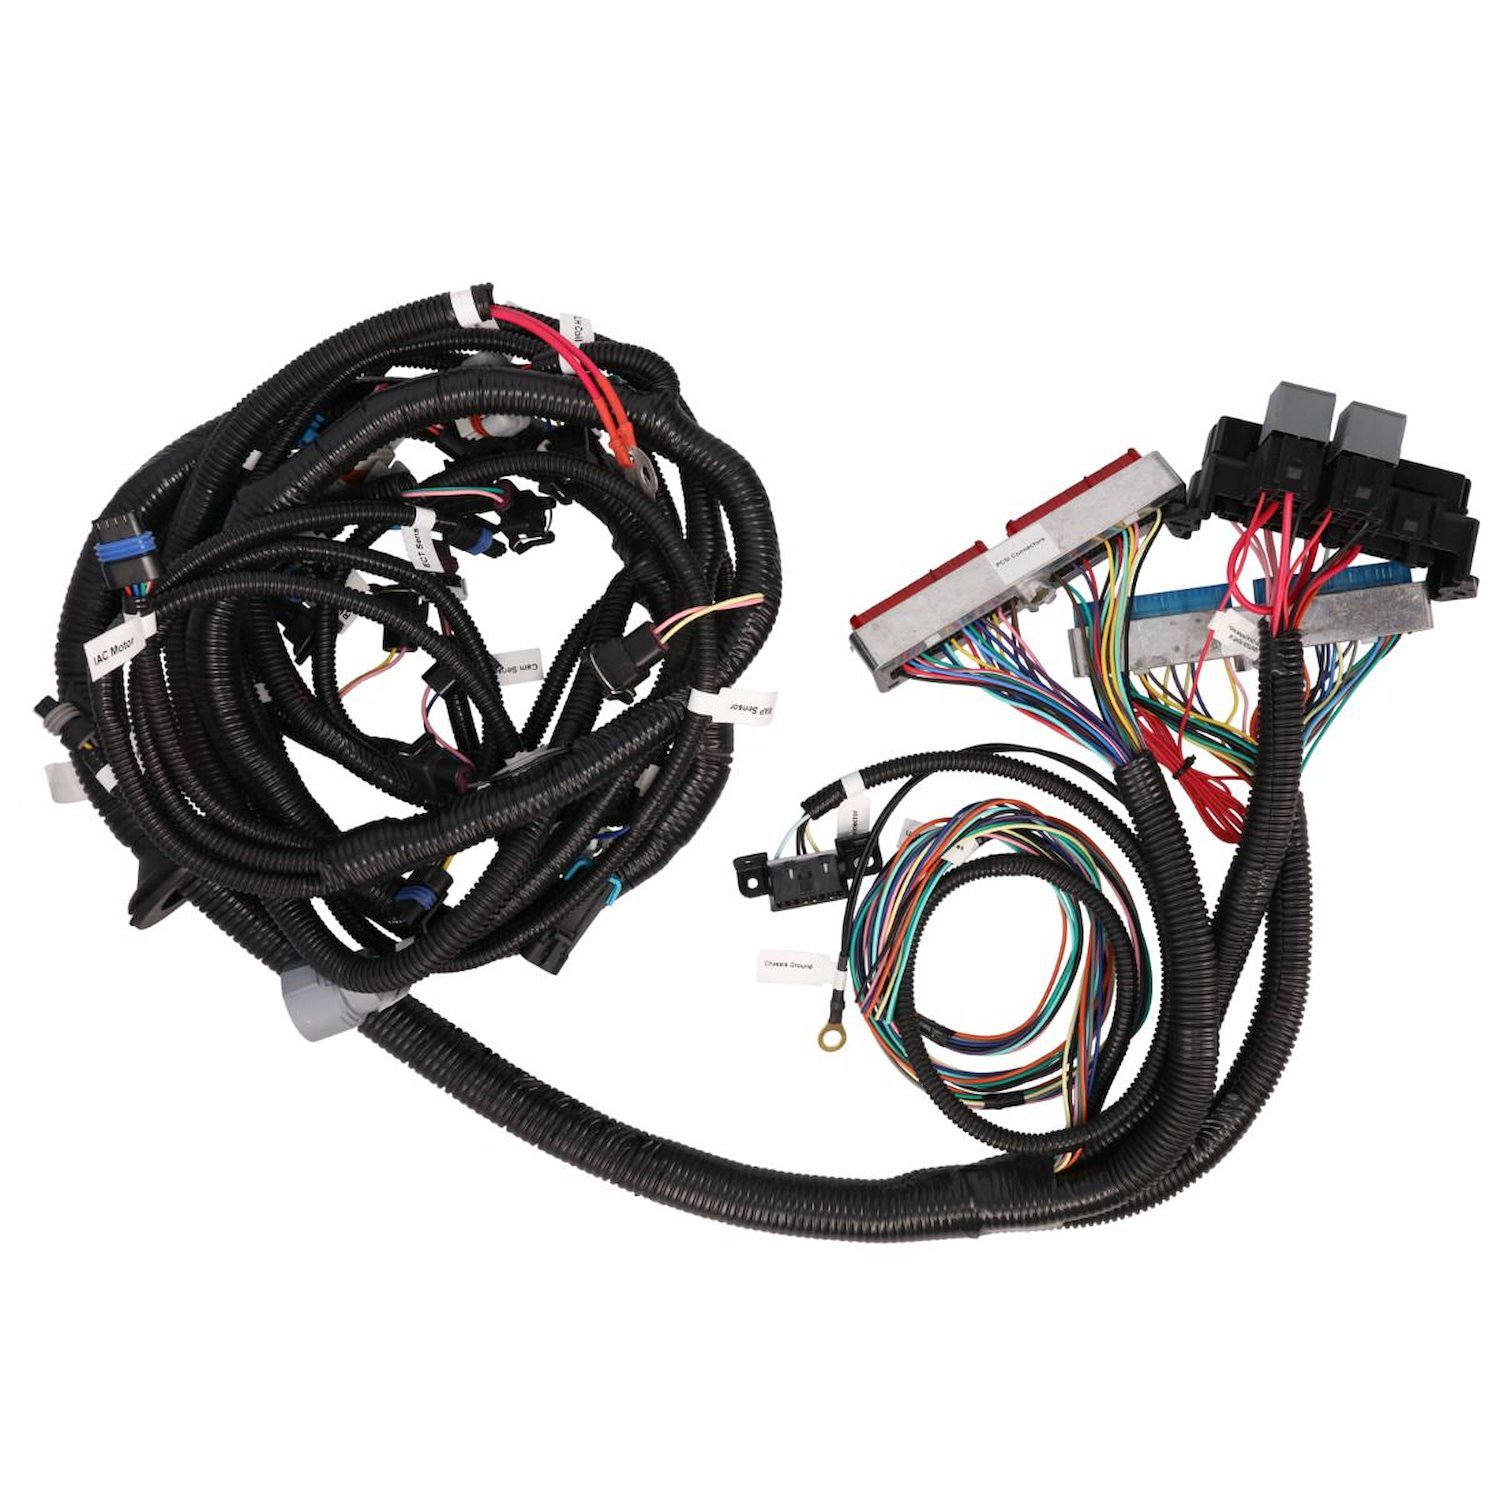 WH1201-1 Standalone Wiring Harness, LS1 Drive by Wire w/ 4L80E Auto